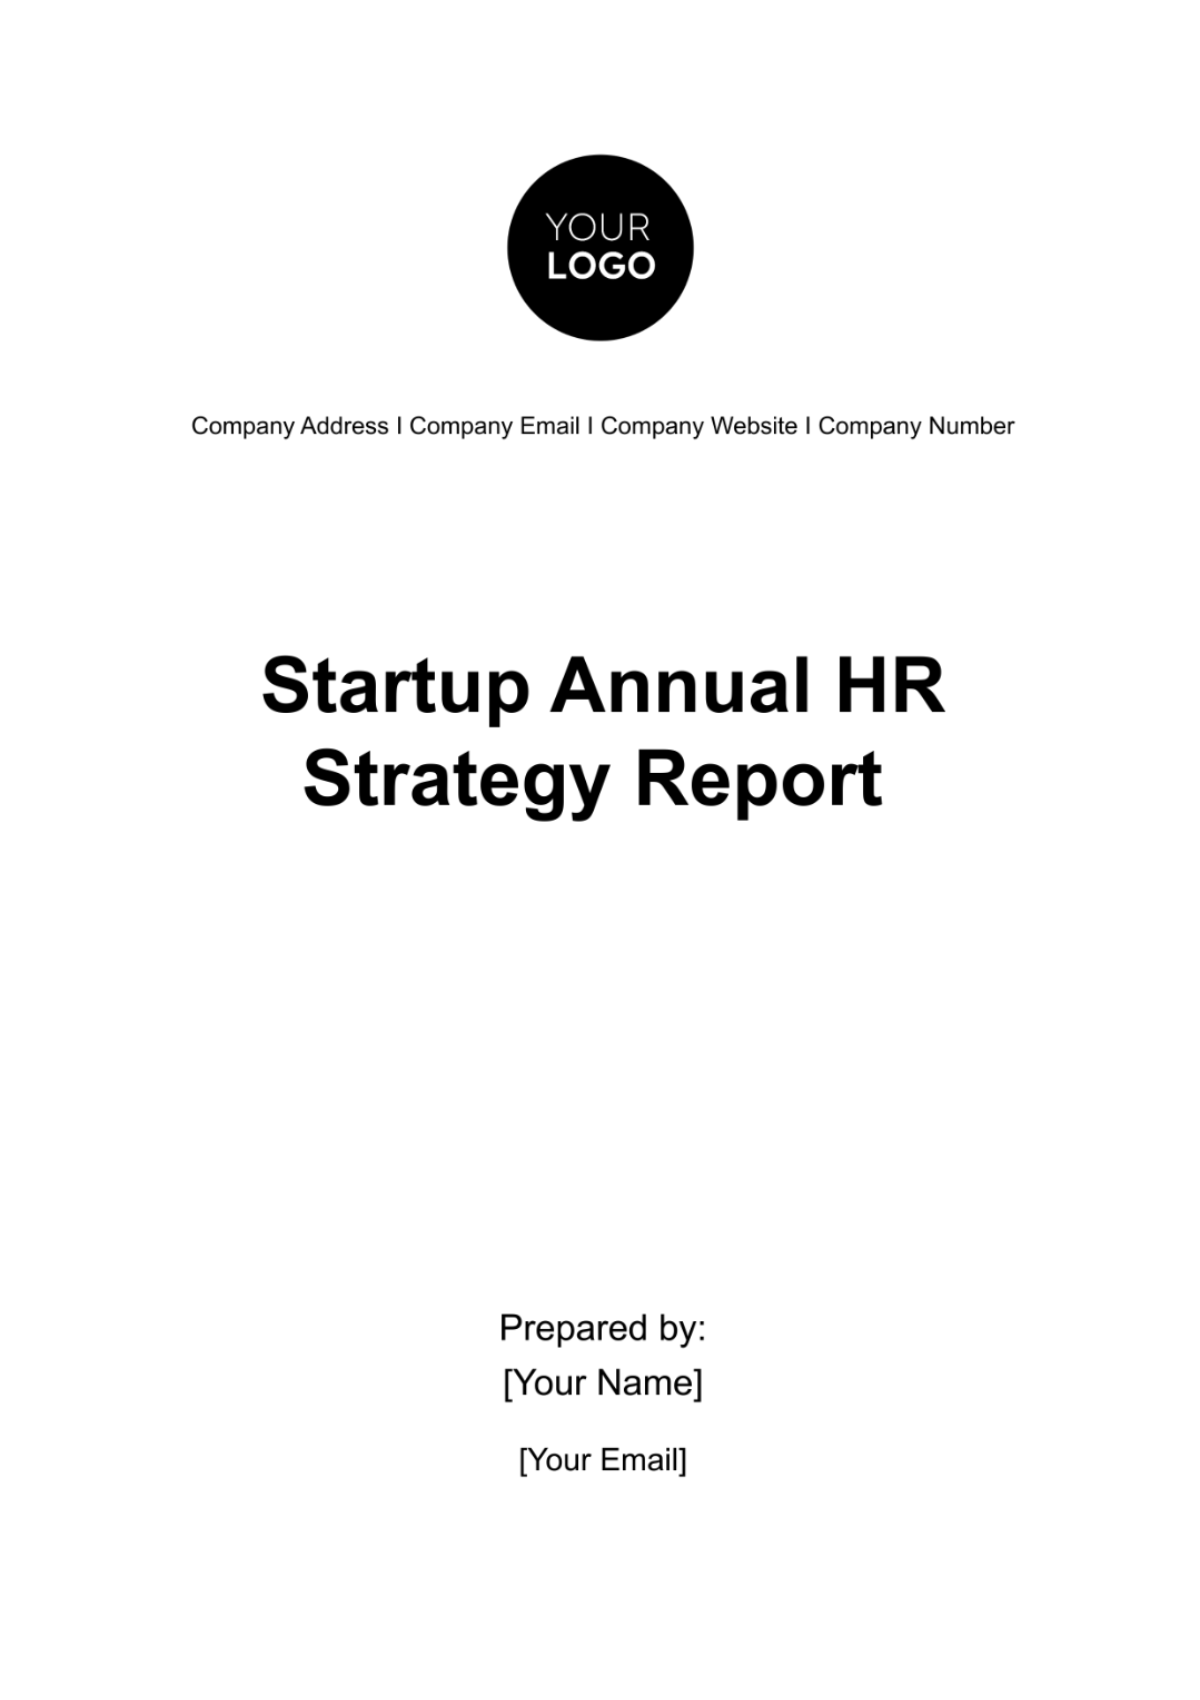 Startup Annual HR Strategy Report Template